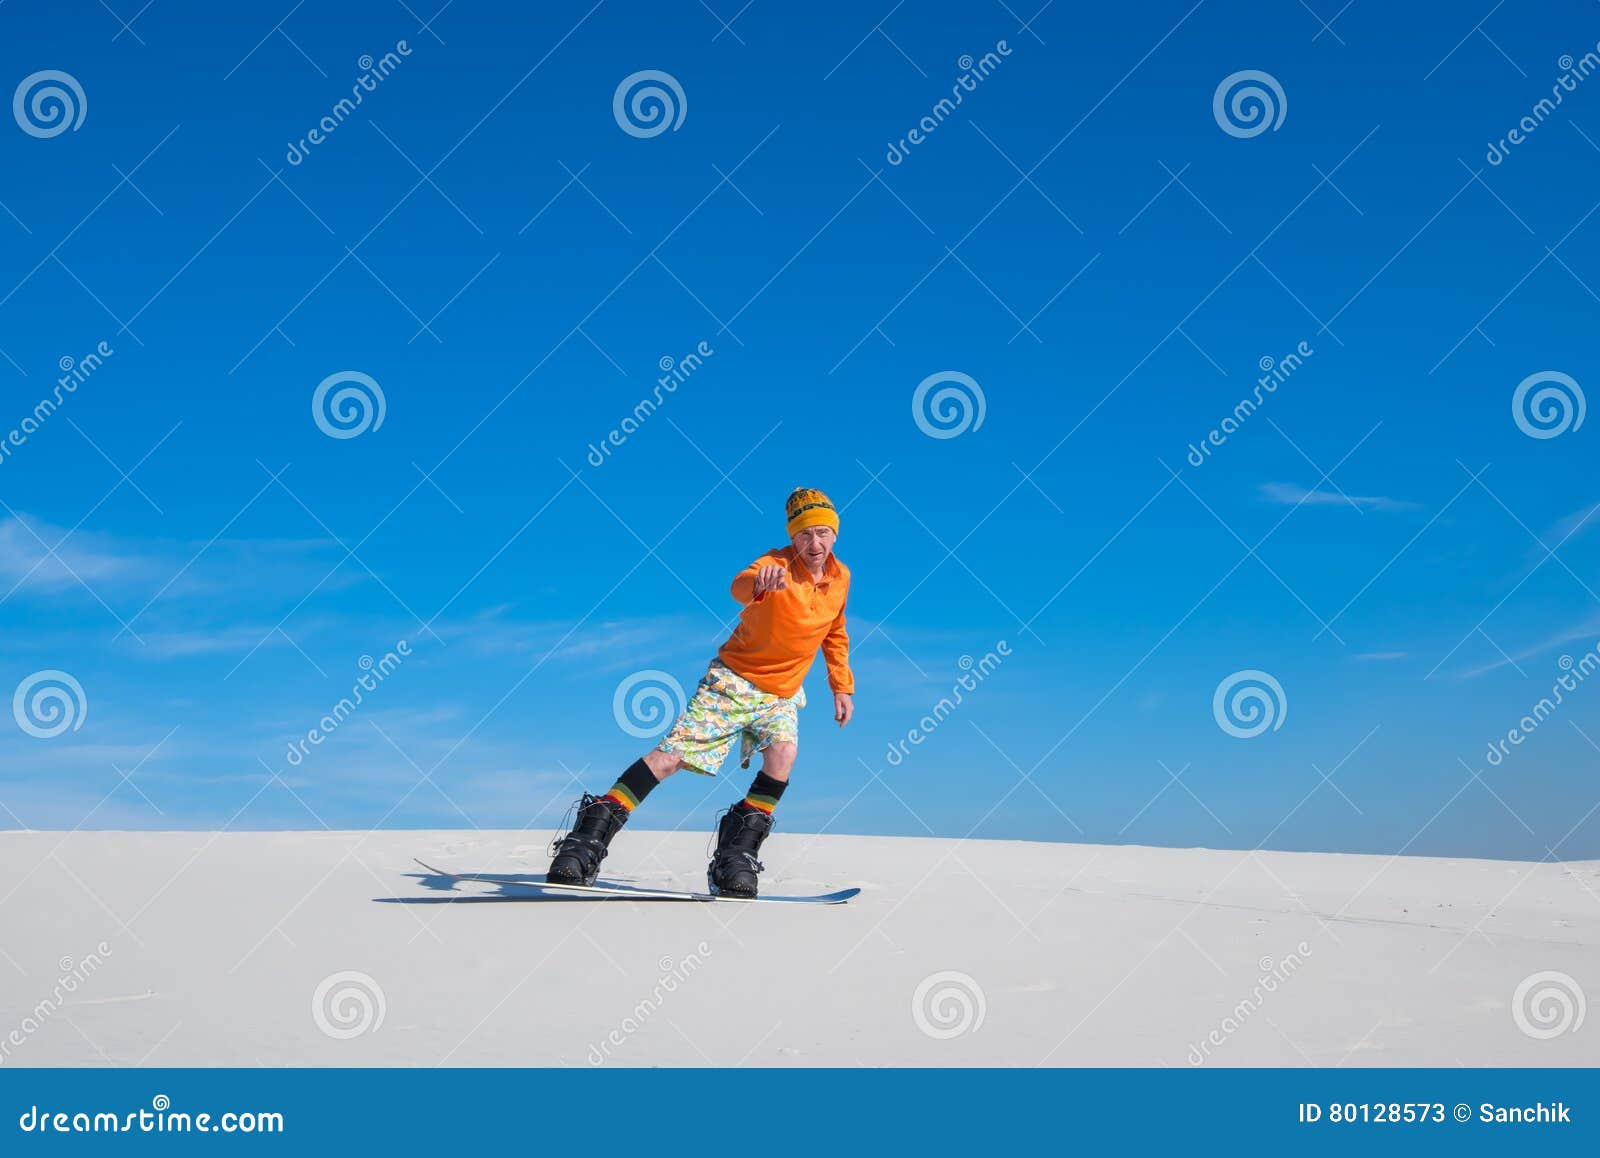 Man on Snowboard, Riding on Sand Slope. Stock Image - Image of ...